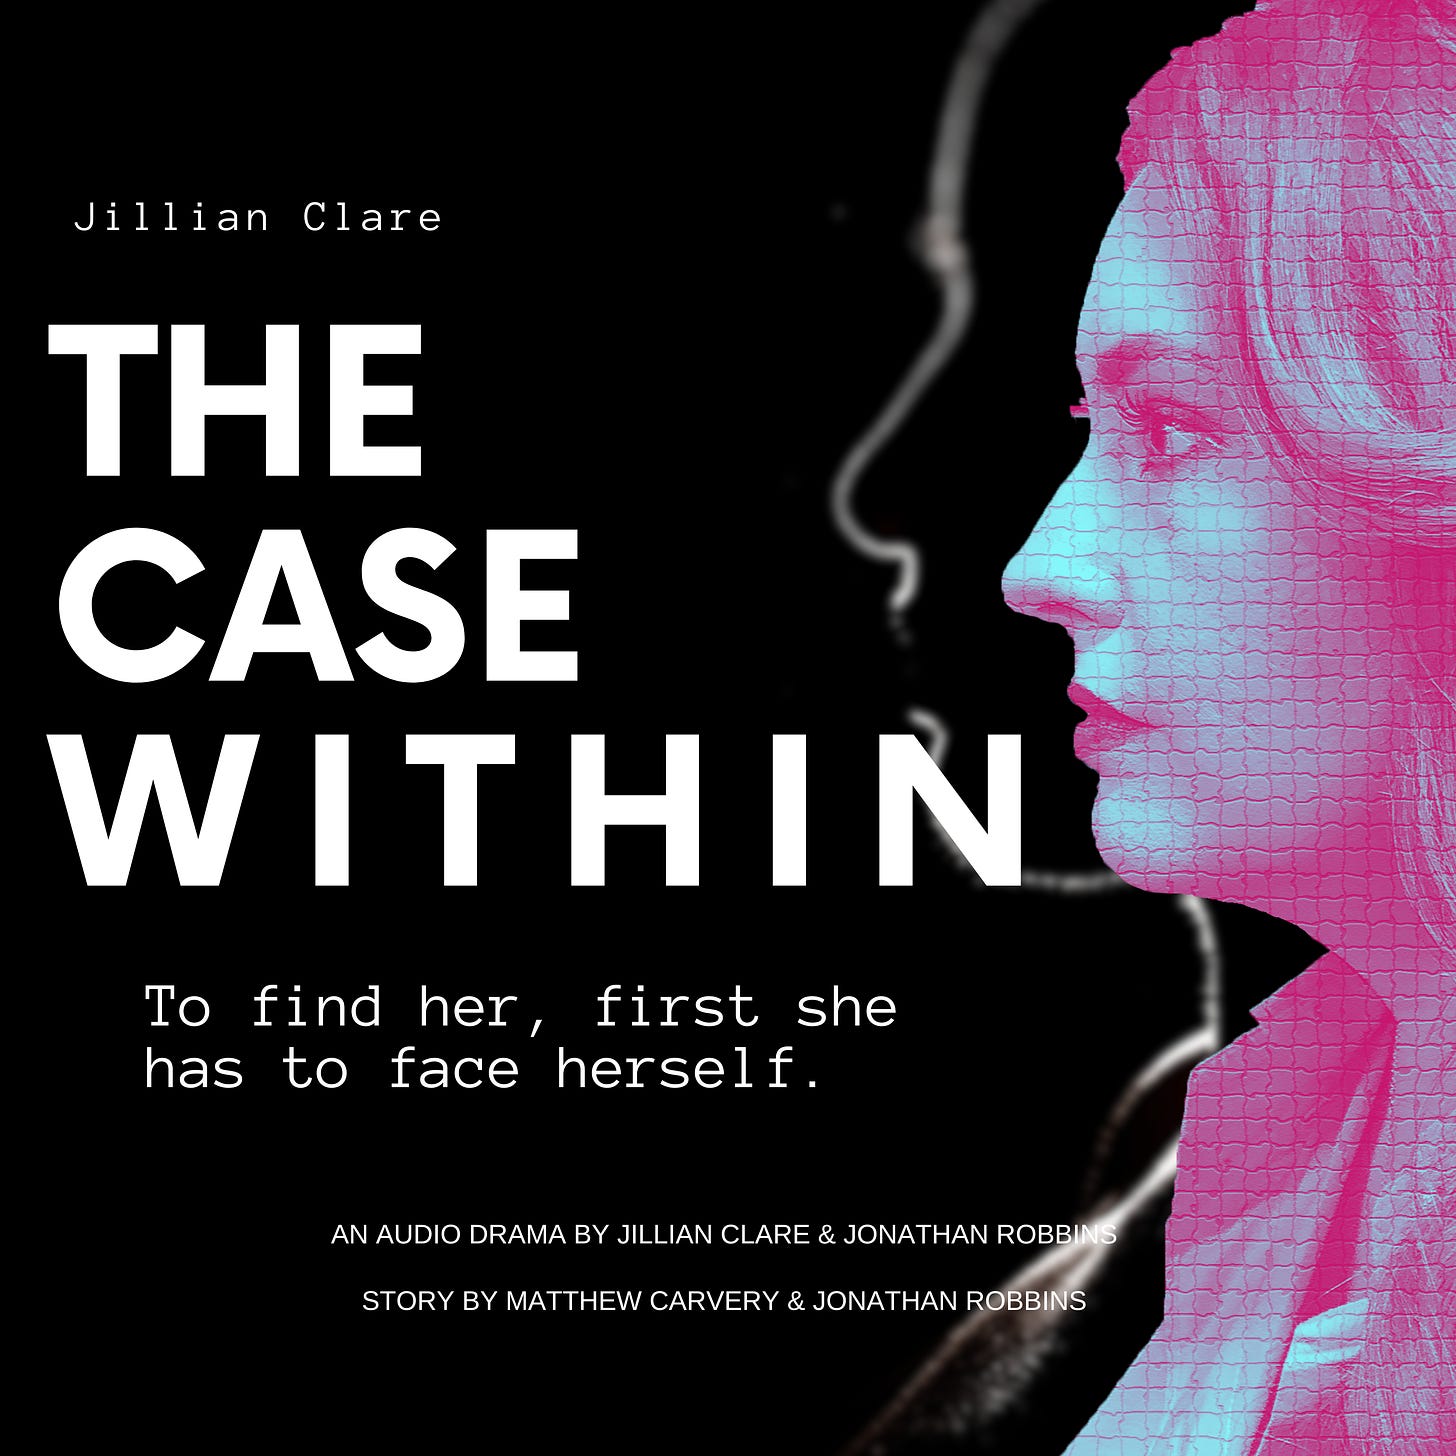 The Case Within stars Jillian Clare as Nicole, Eric Martsolf as Charles, Jillian Shea Spaeder as Erin, Martha Madison as Jennifer, and Jonathan W. Robbins as the Narrator. Co-starring A. Martinez, Patrika Darbo, Abhi Sinha, Darrell Dennis, and Addie Daddio. Click here to check it out.